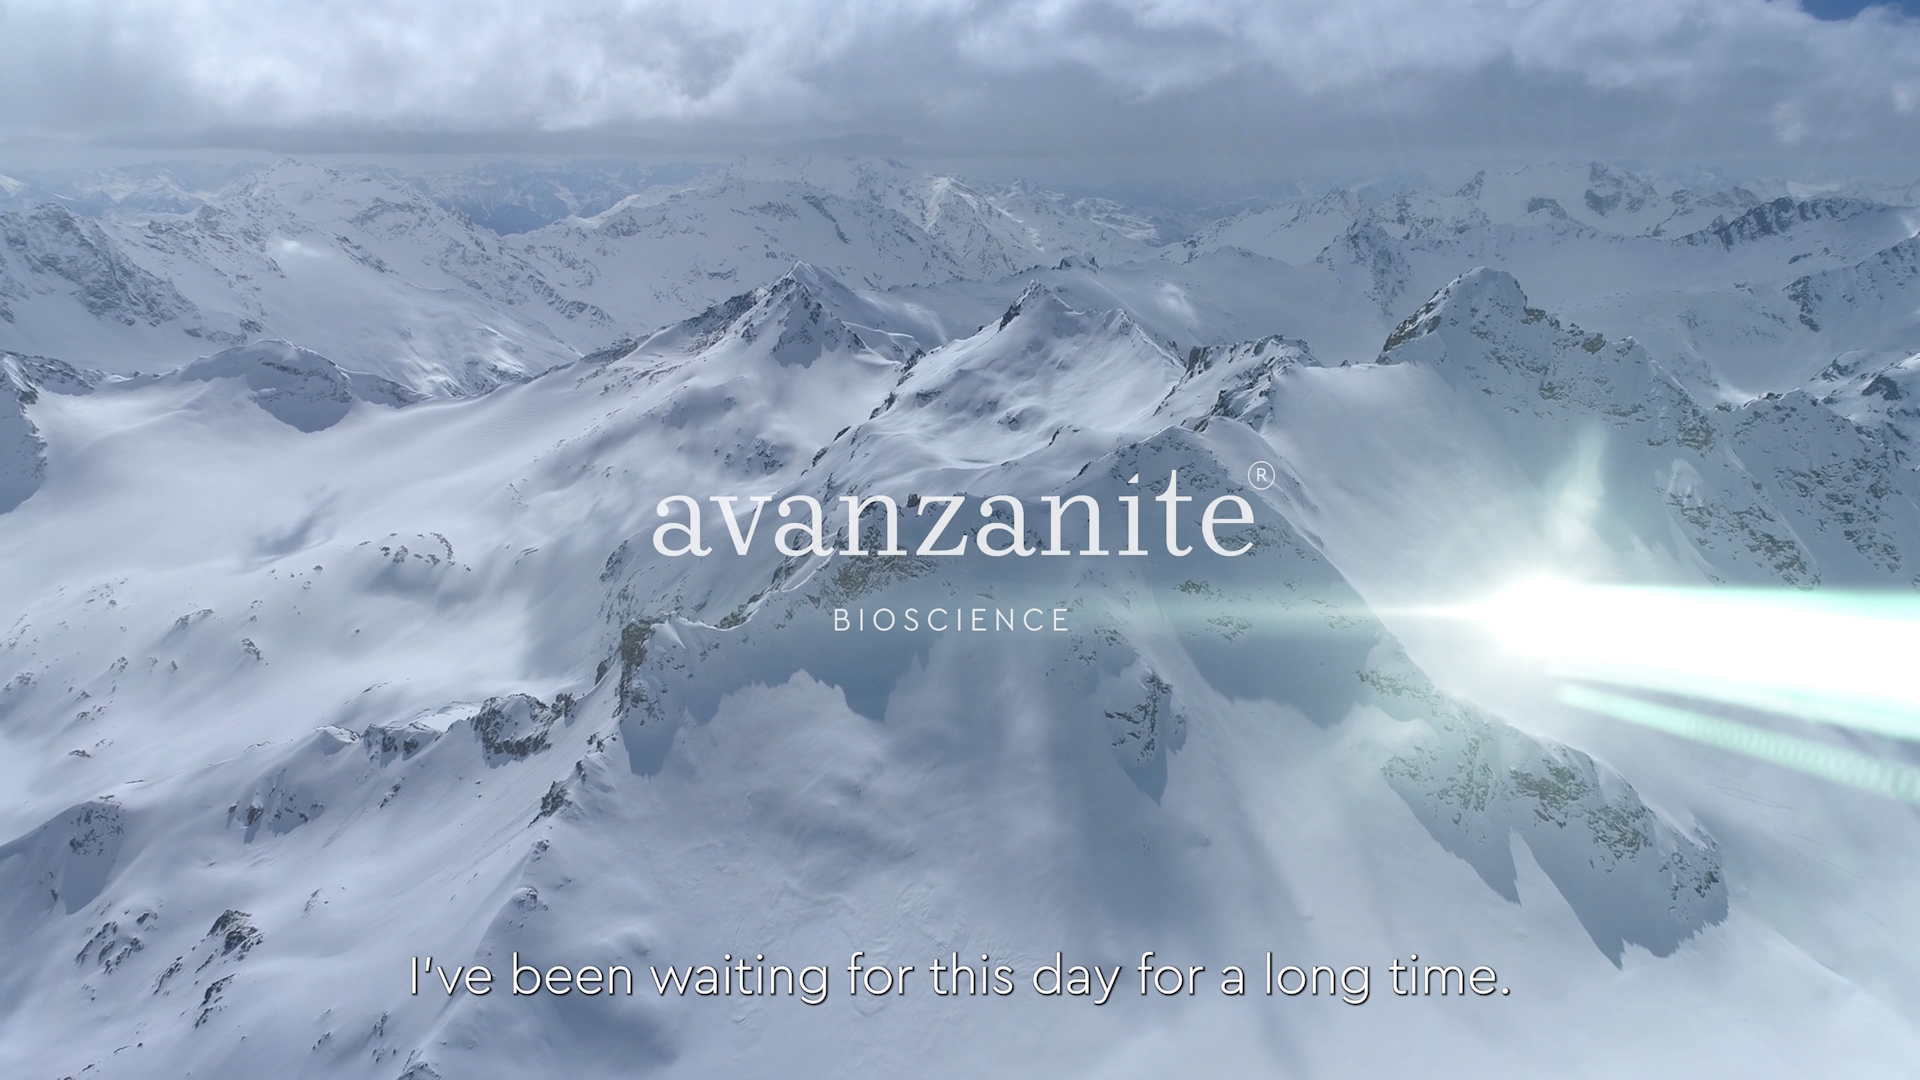 Why We Founded Avanzanite Bioscience